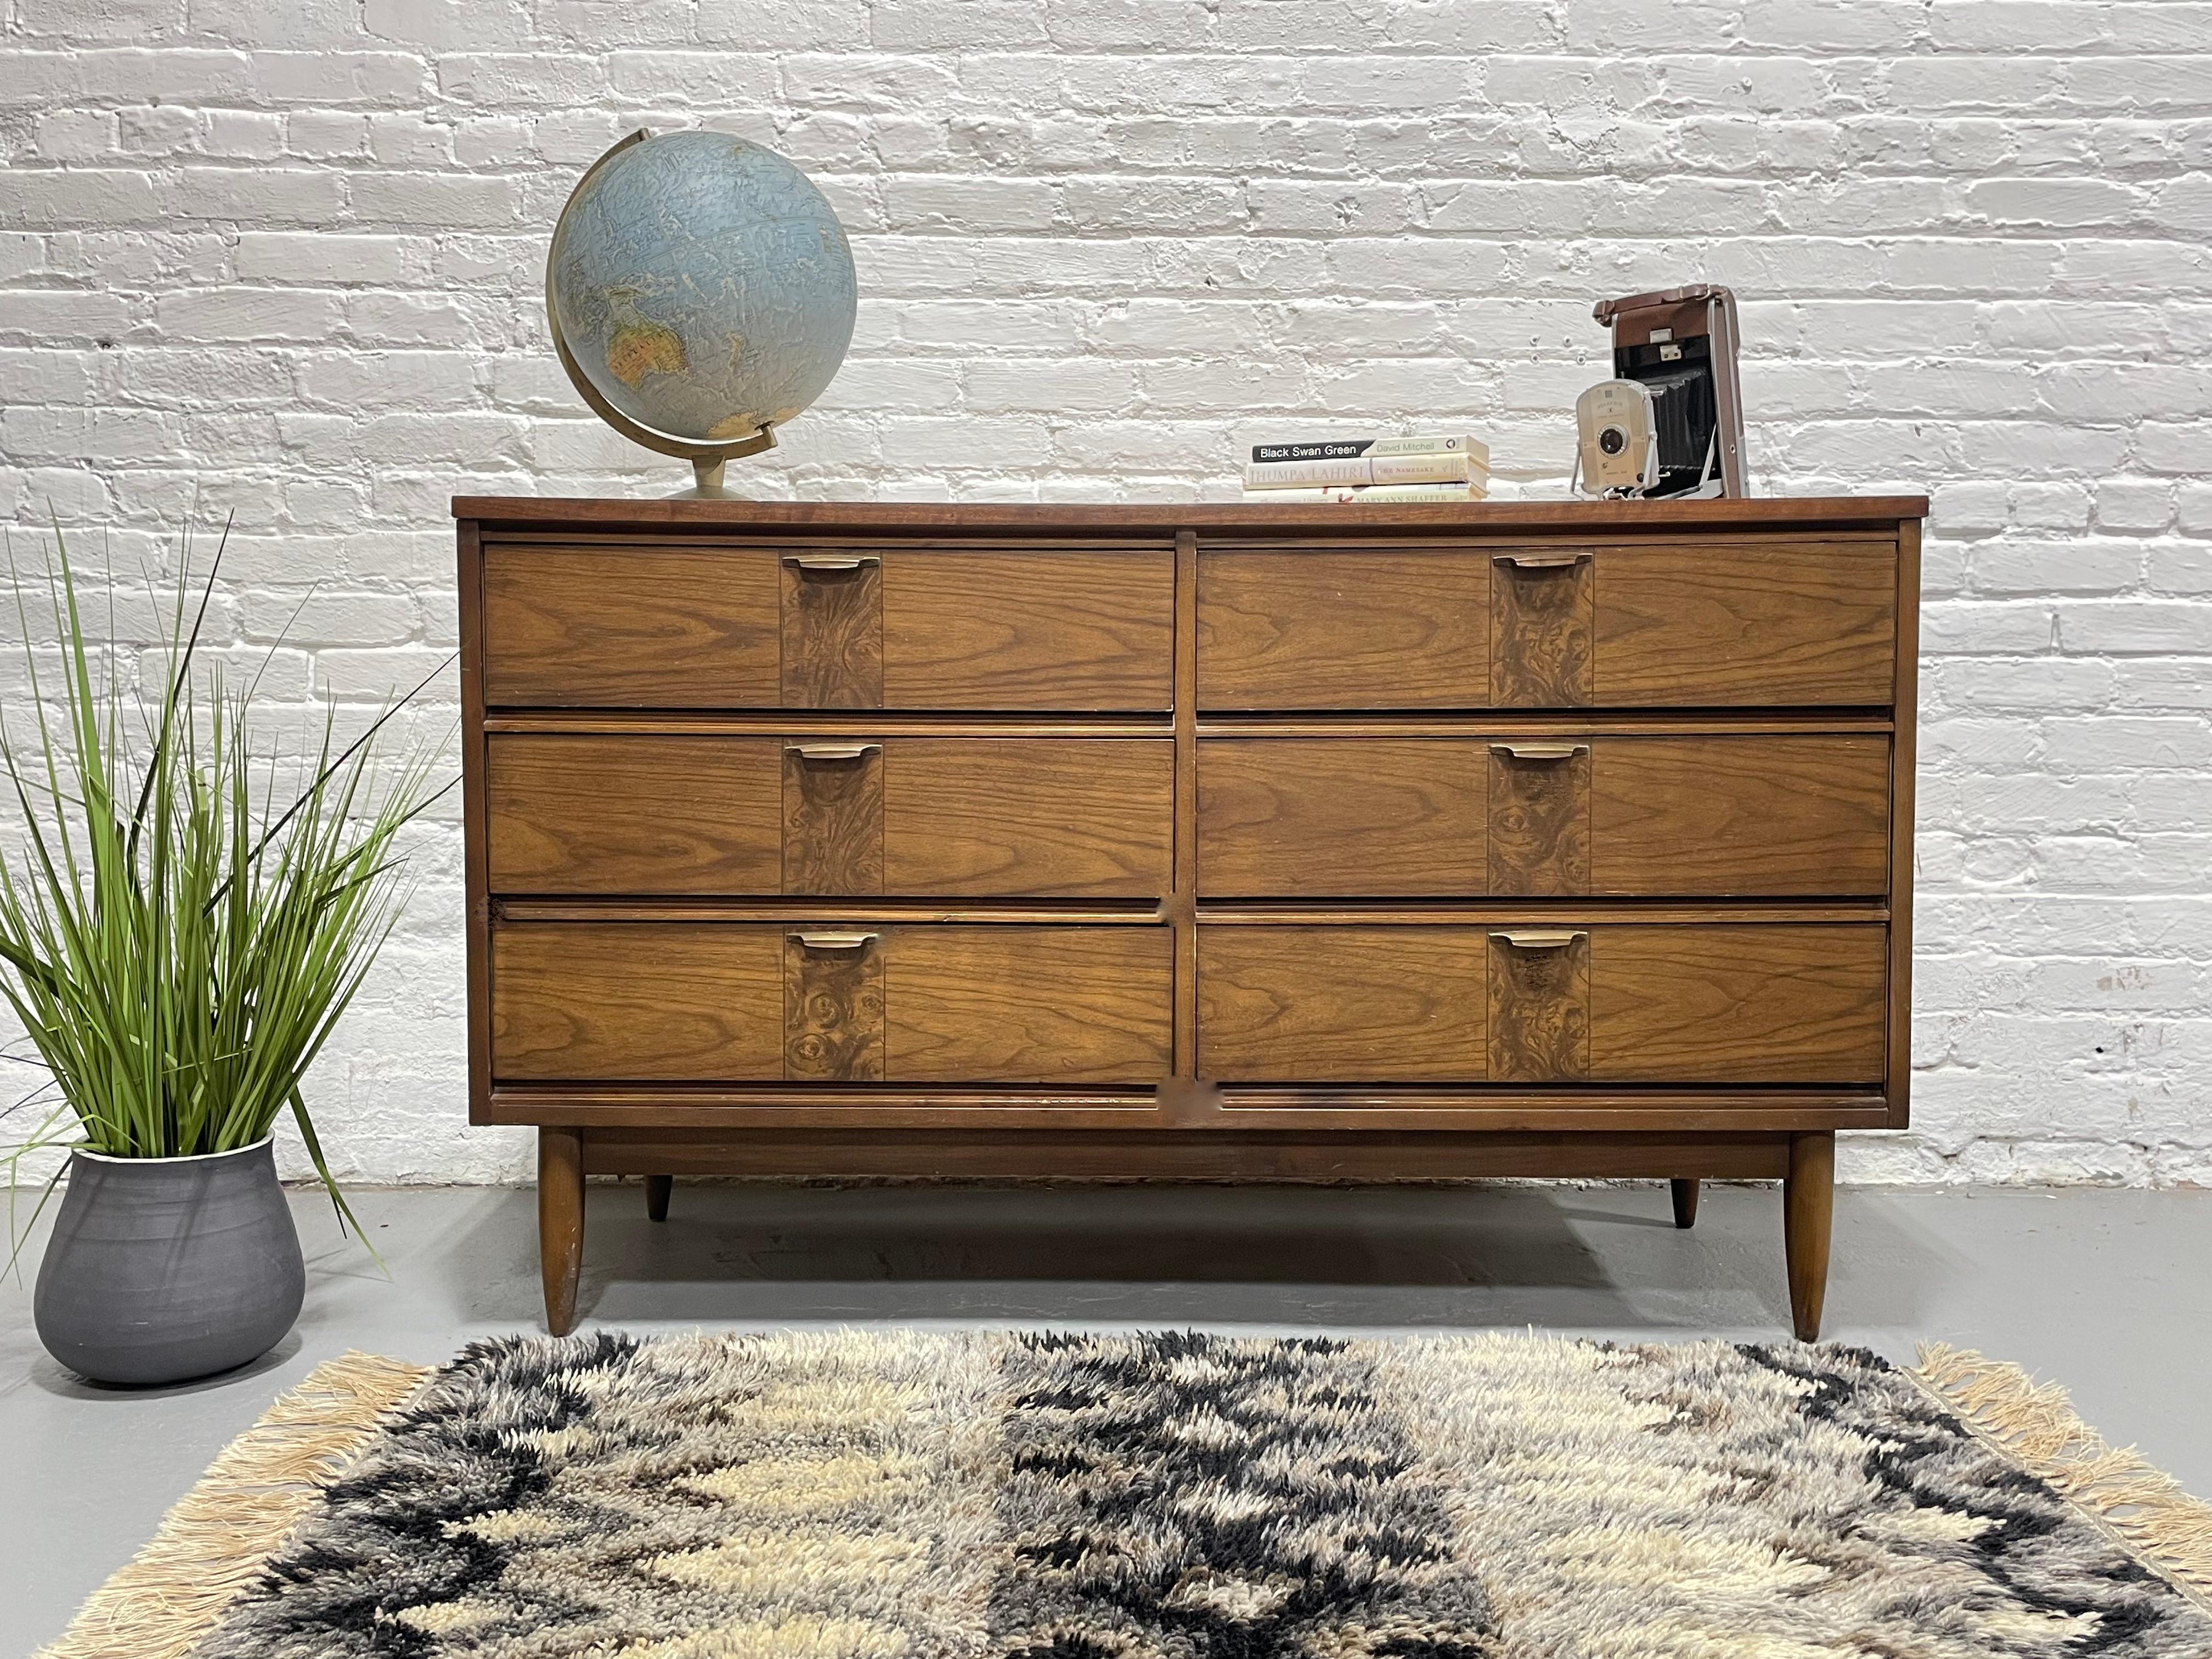 Mid Century Modern Walnut Credenza / Dresser consisting of six spacious drawers for all your clothing storage needs. The dresser is highlighted by a lovely decorative design on each drawer front.  Lovely vintage condition with a newly refinished